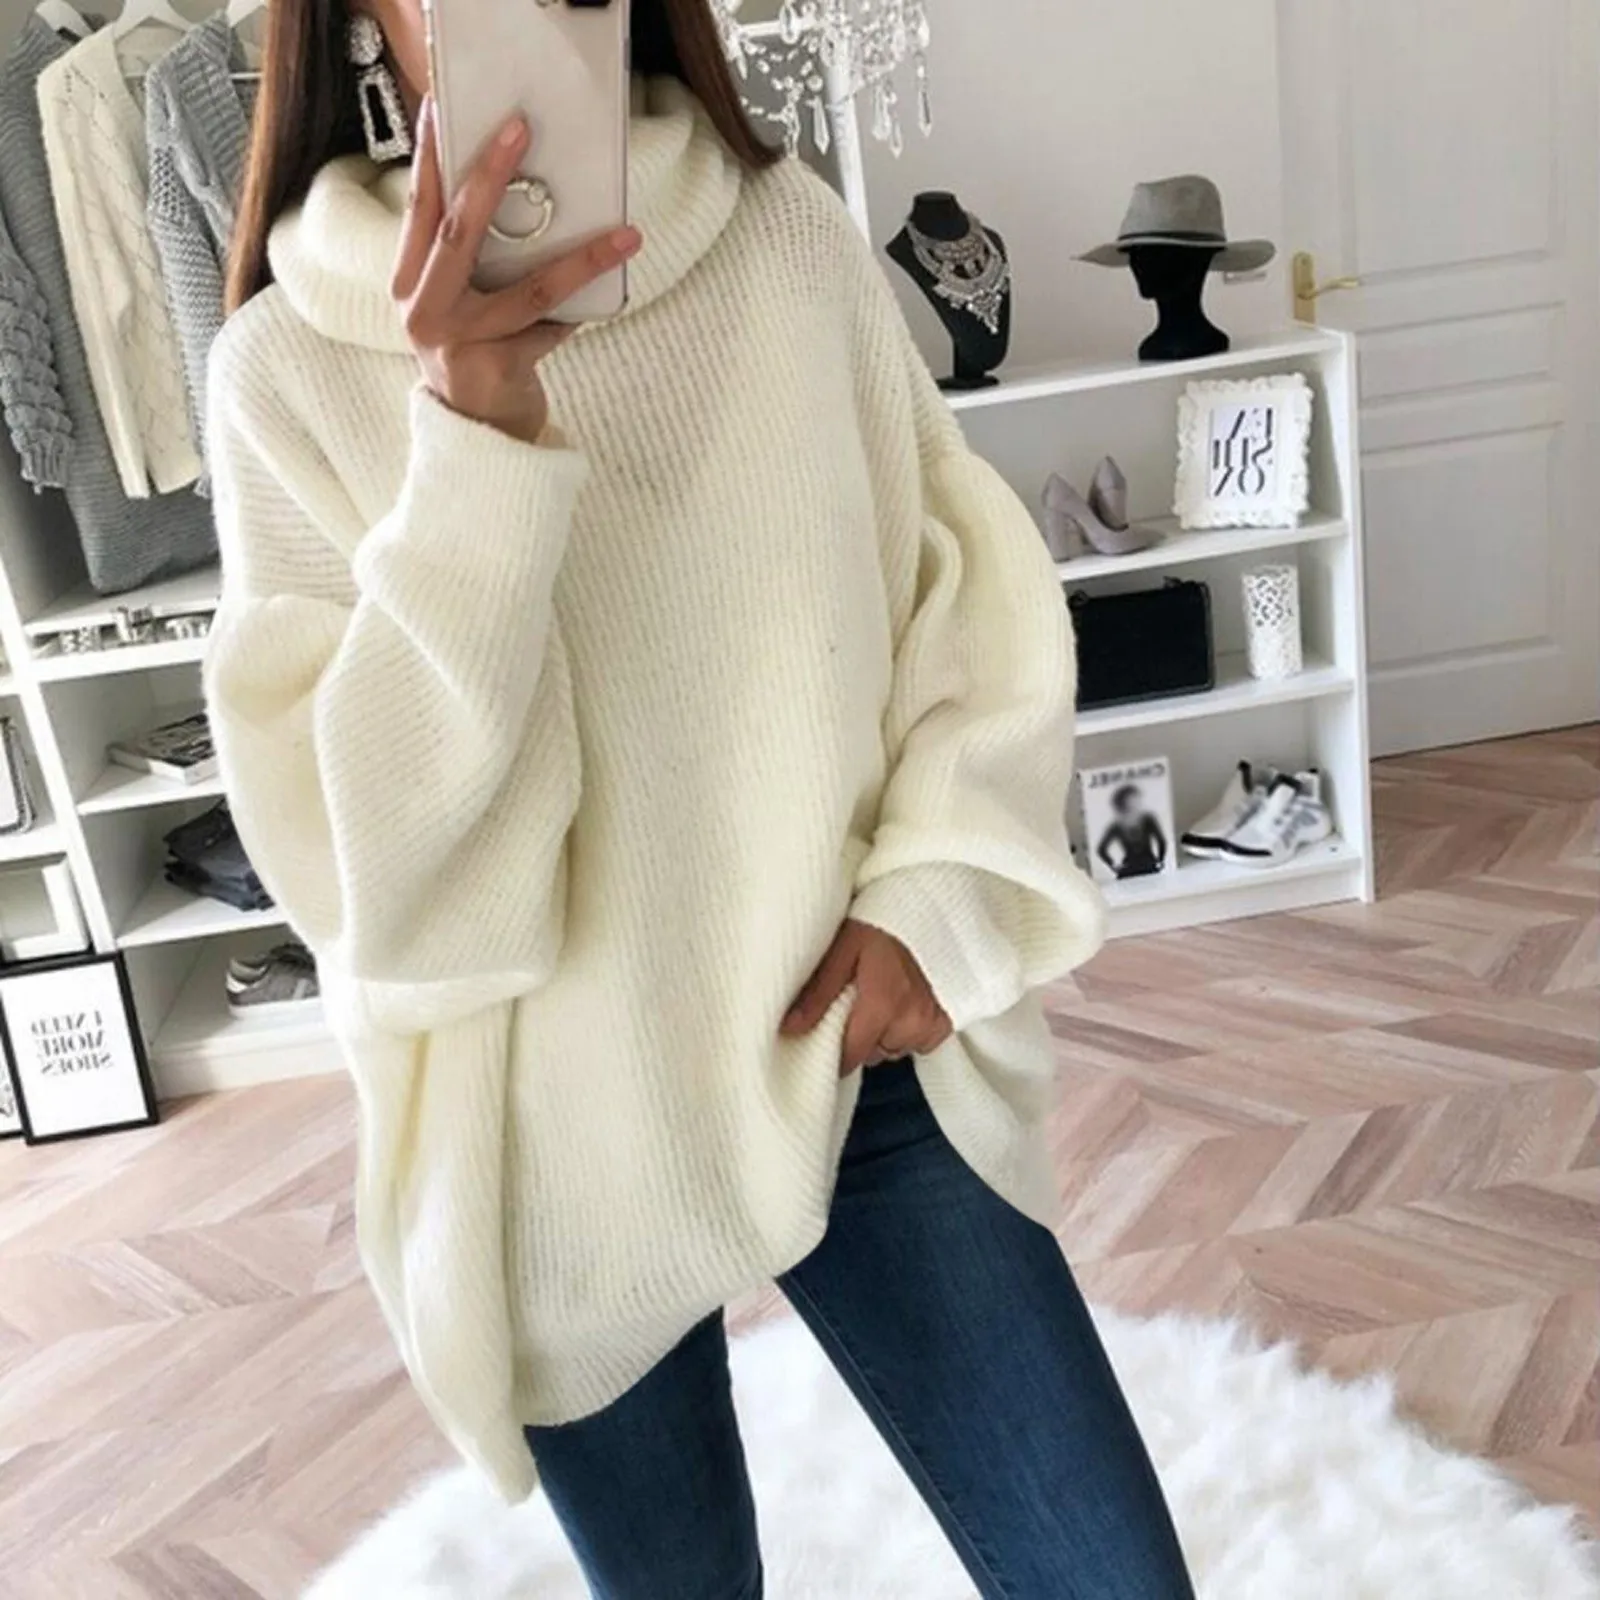 4# Women Sweater Pullovers Pull Femme Hiver Solid Casual O neck Shoulder Pocket Knitted Sweater Knitwear Top Winter Clothes